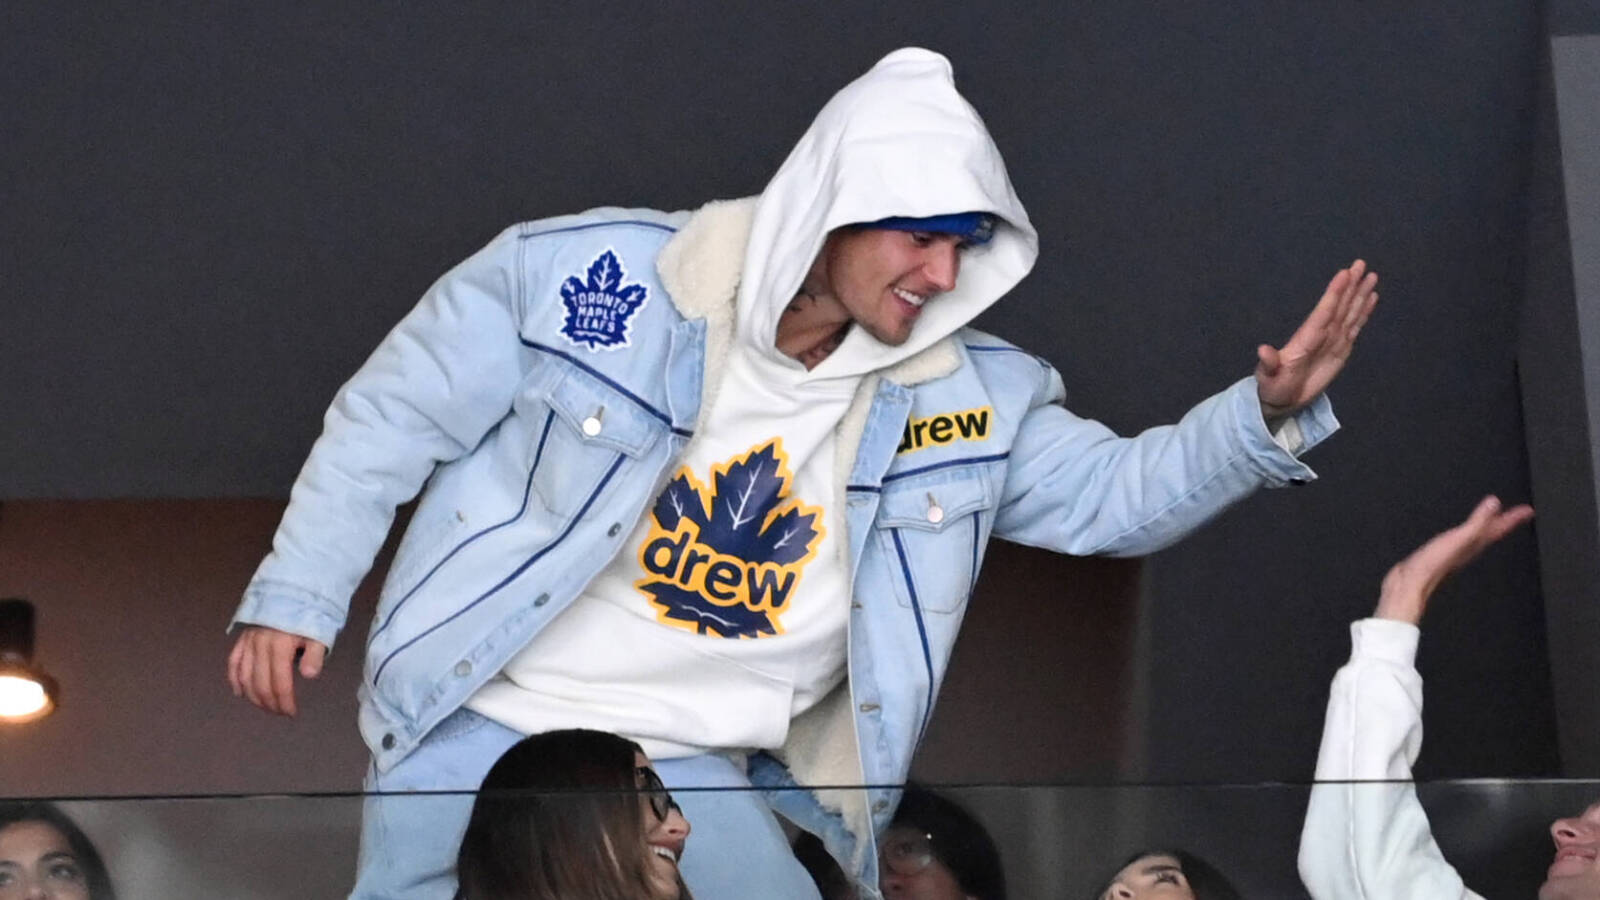 Toronto Maple Leafs collab with Justin Bieber and drew house for reversible  sweater